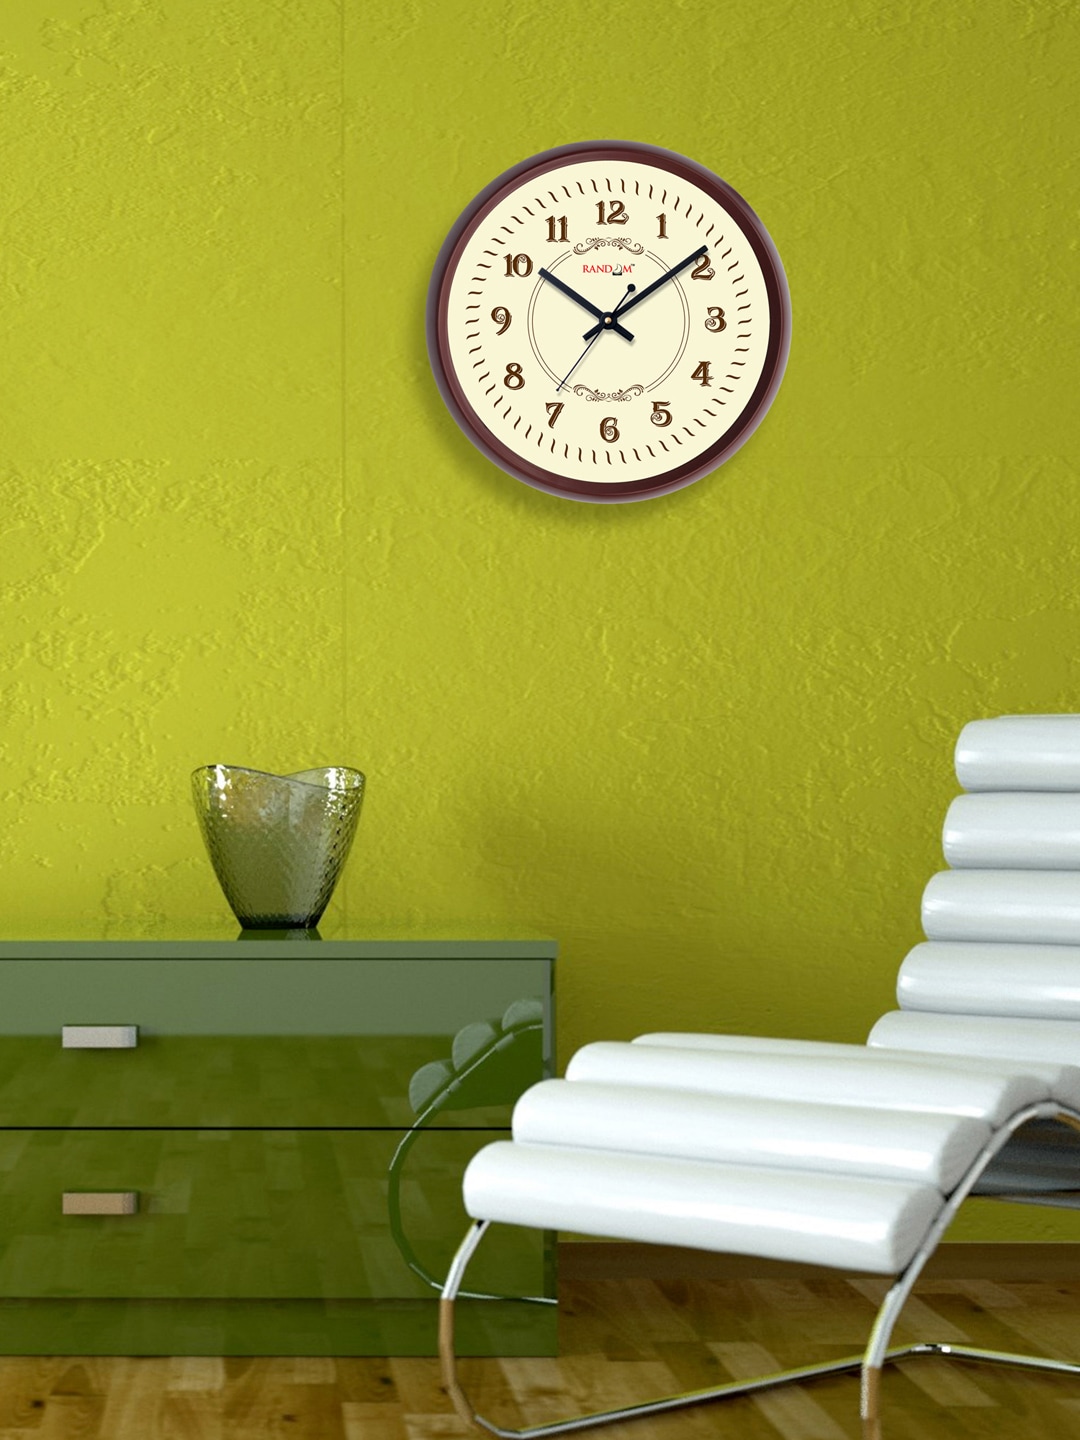 RANDOM Beige & Brown Round Analogue Wall Clock Price in India